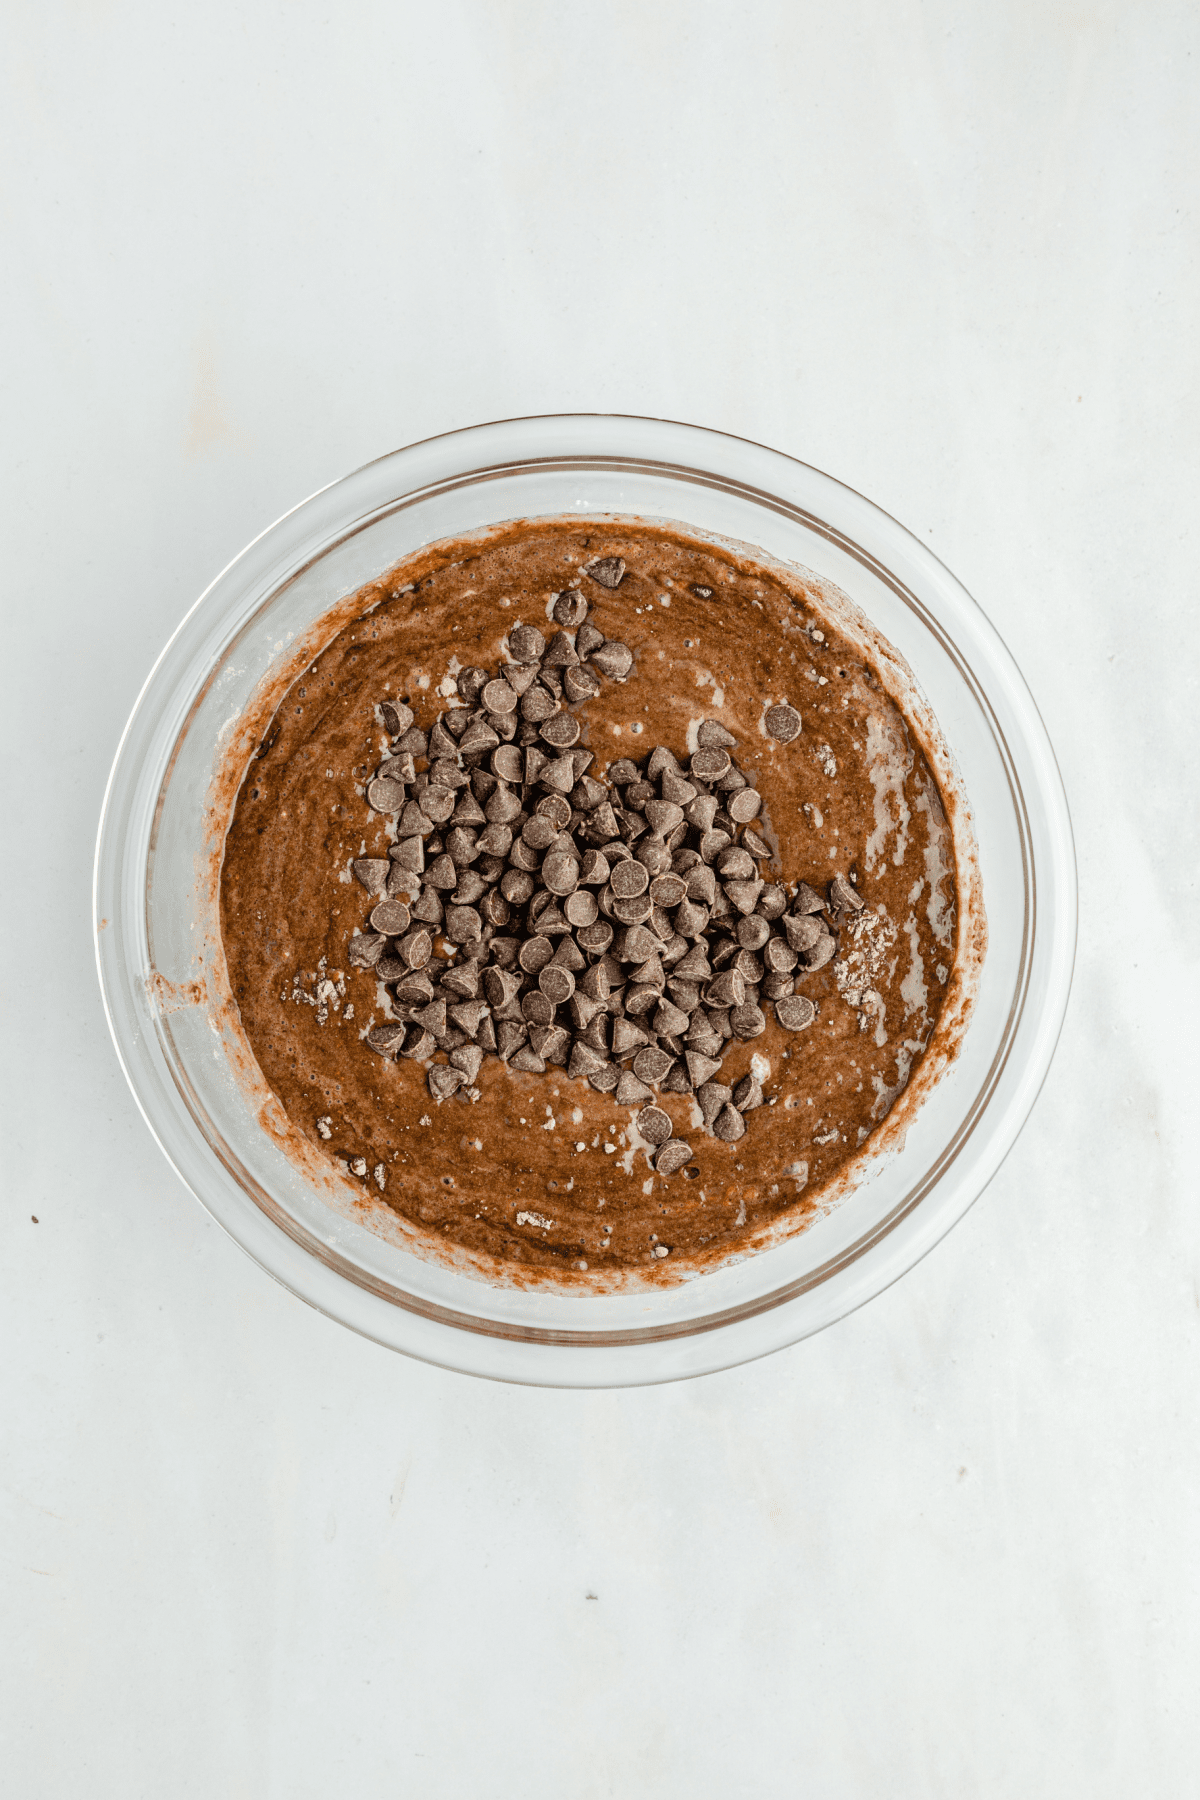 Chocolate chips in cake mix